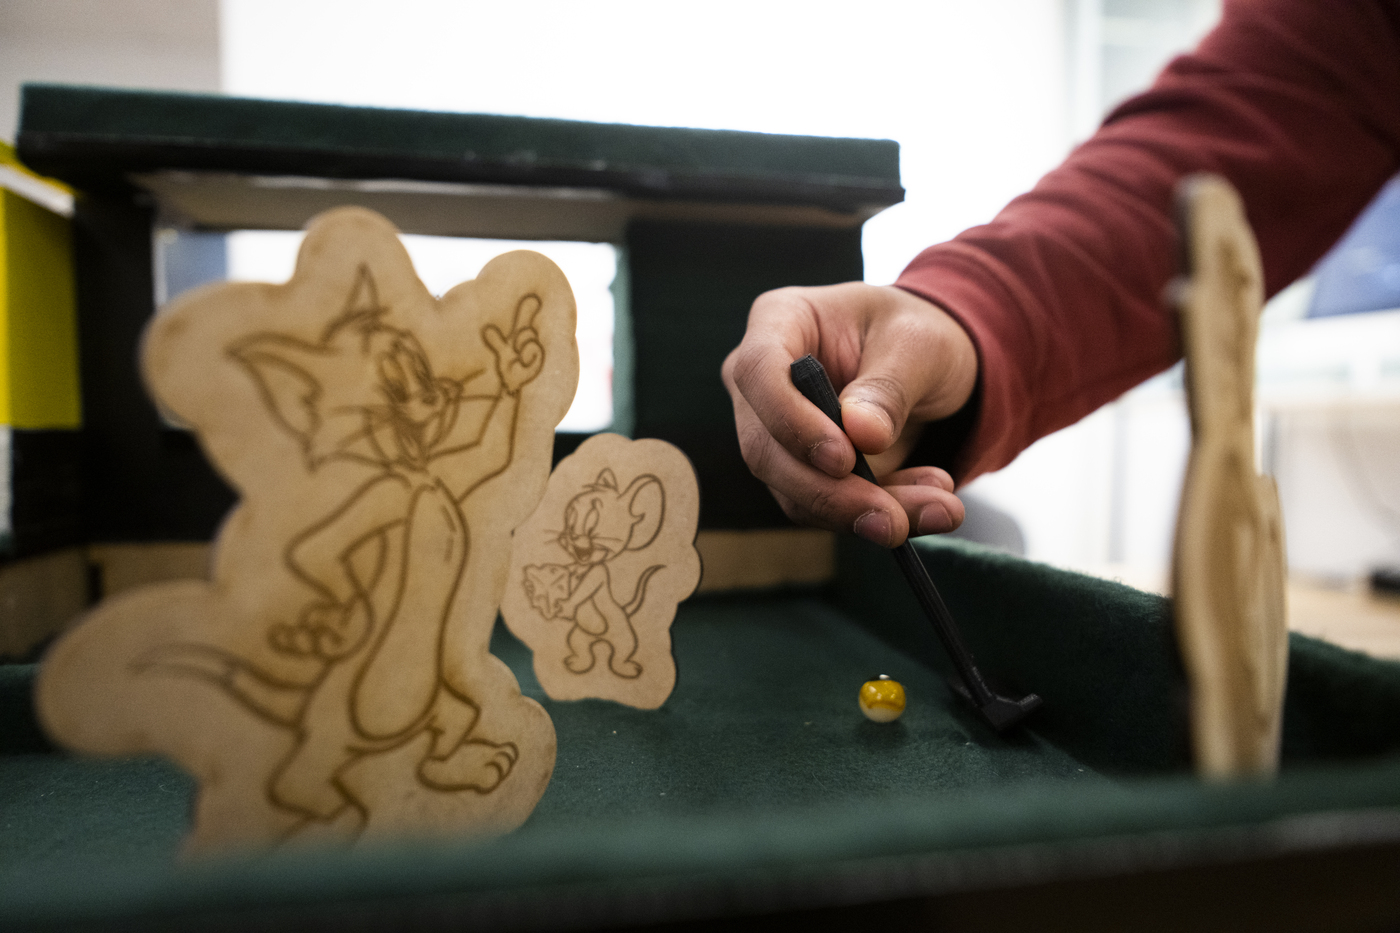 close-up of person's hand using hand-held putter to tap a marble around laser-cut certical obstacles of Tom and Jerry